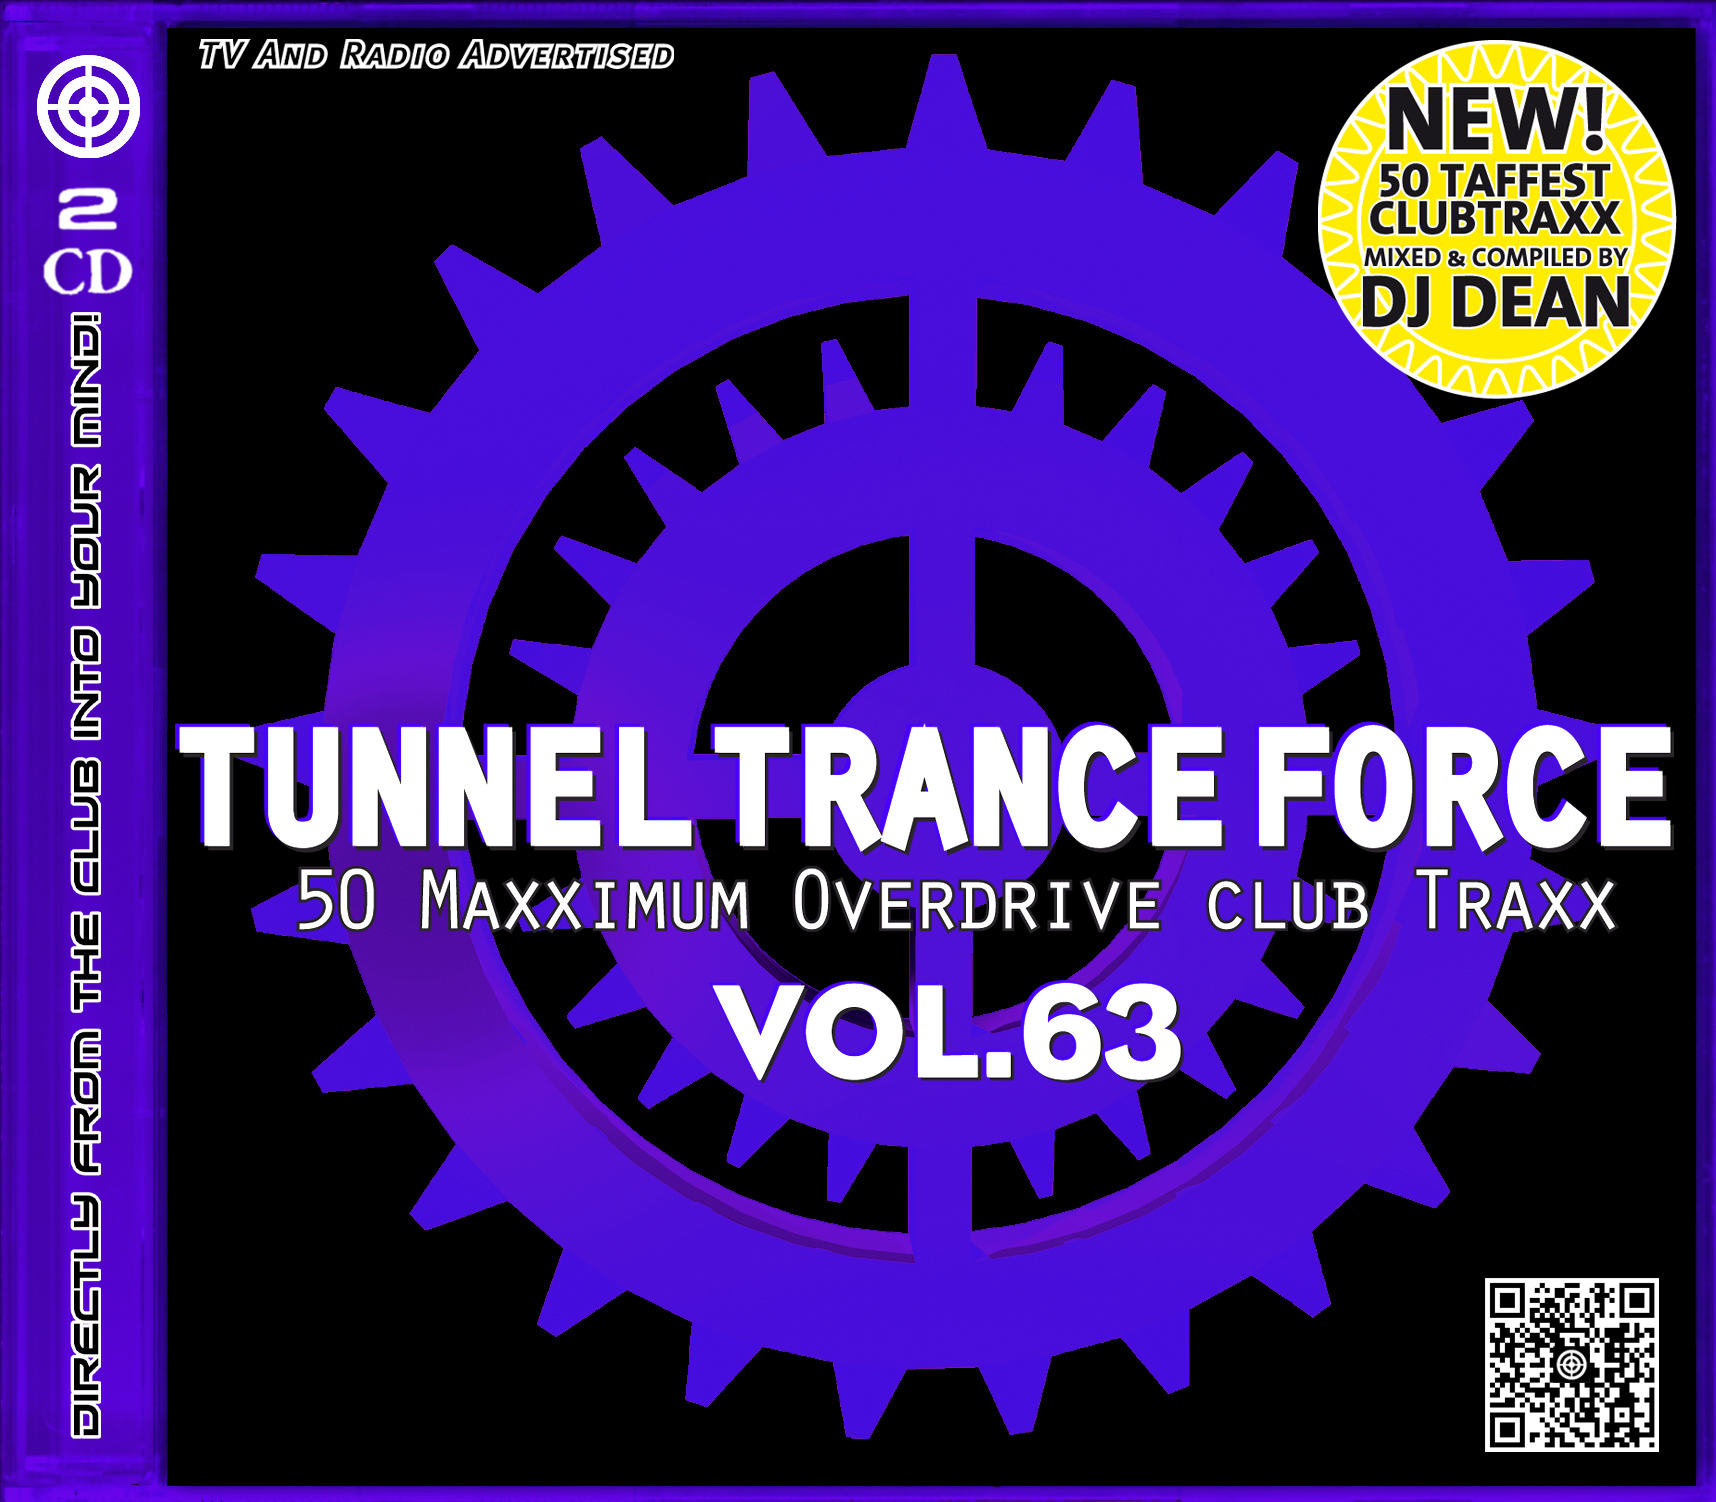 "Tunnel Trance Force Vol.63"